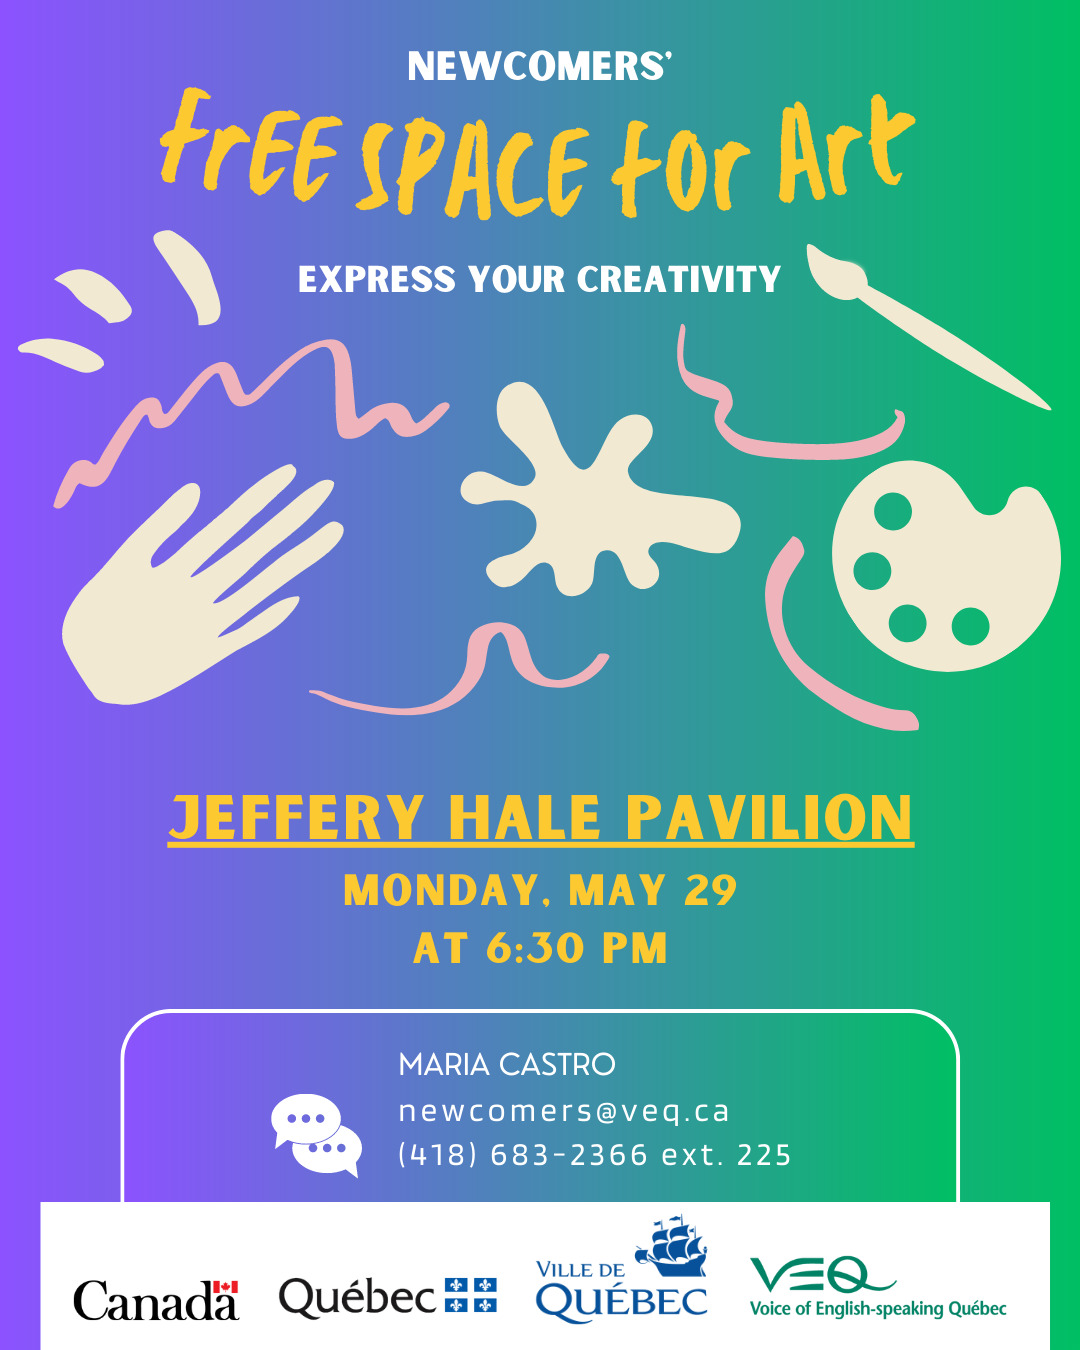 CANCELLED - Newcomers' Free Space for Art @ Jeffery Hale Pavilion